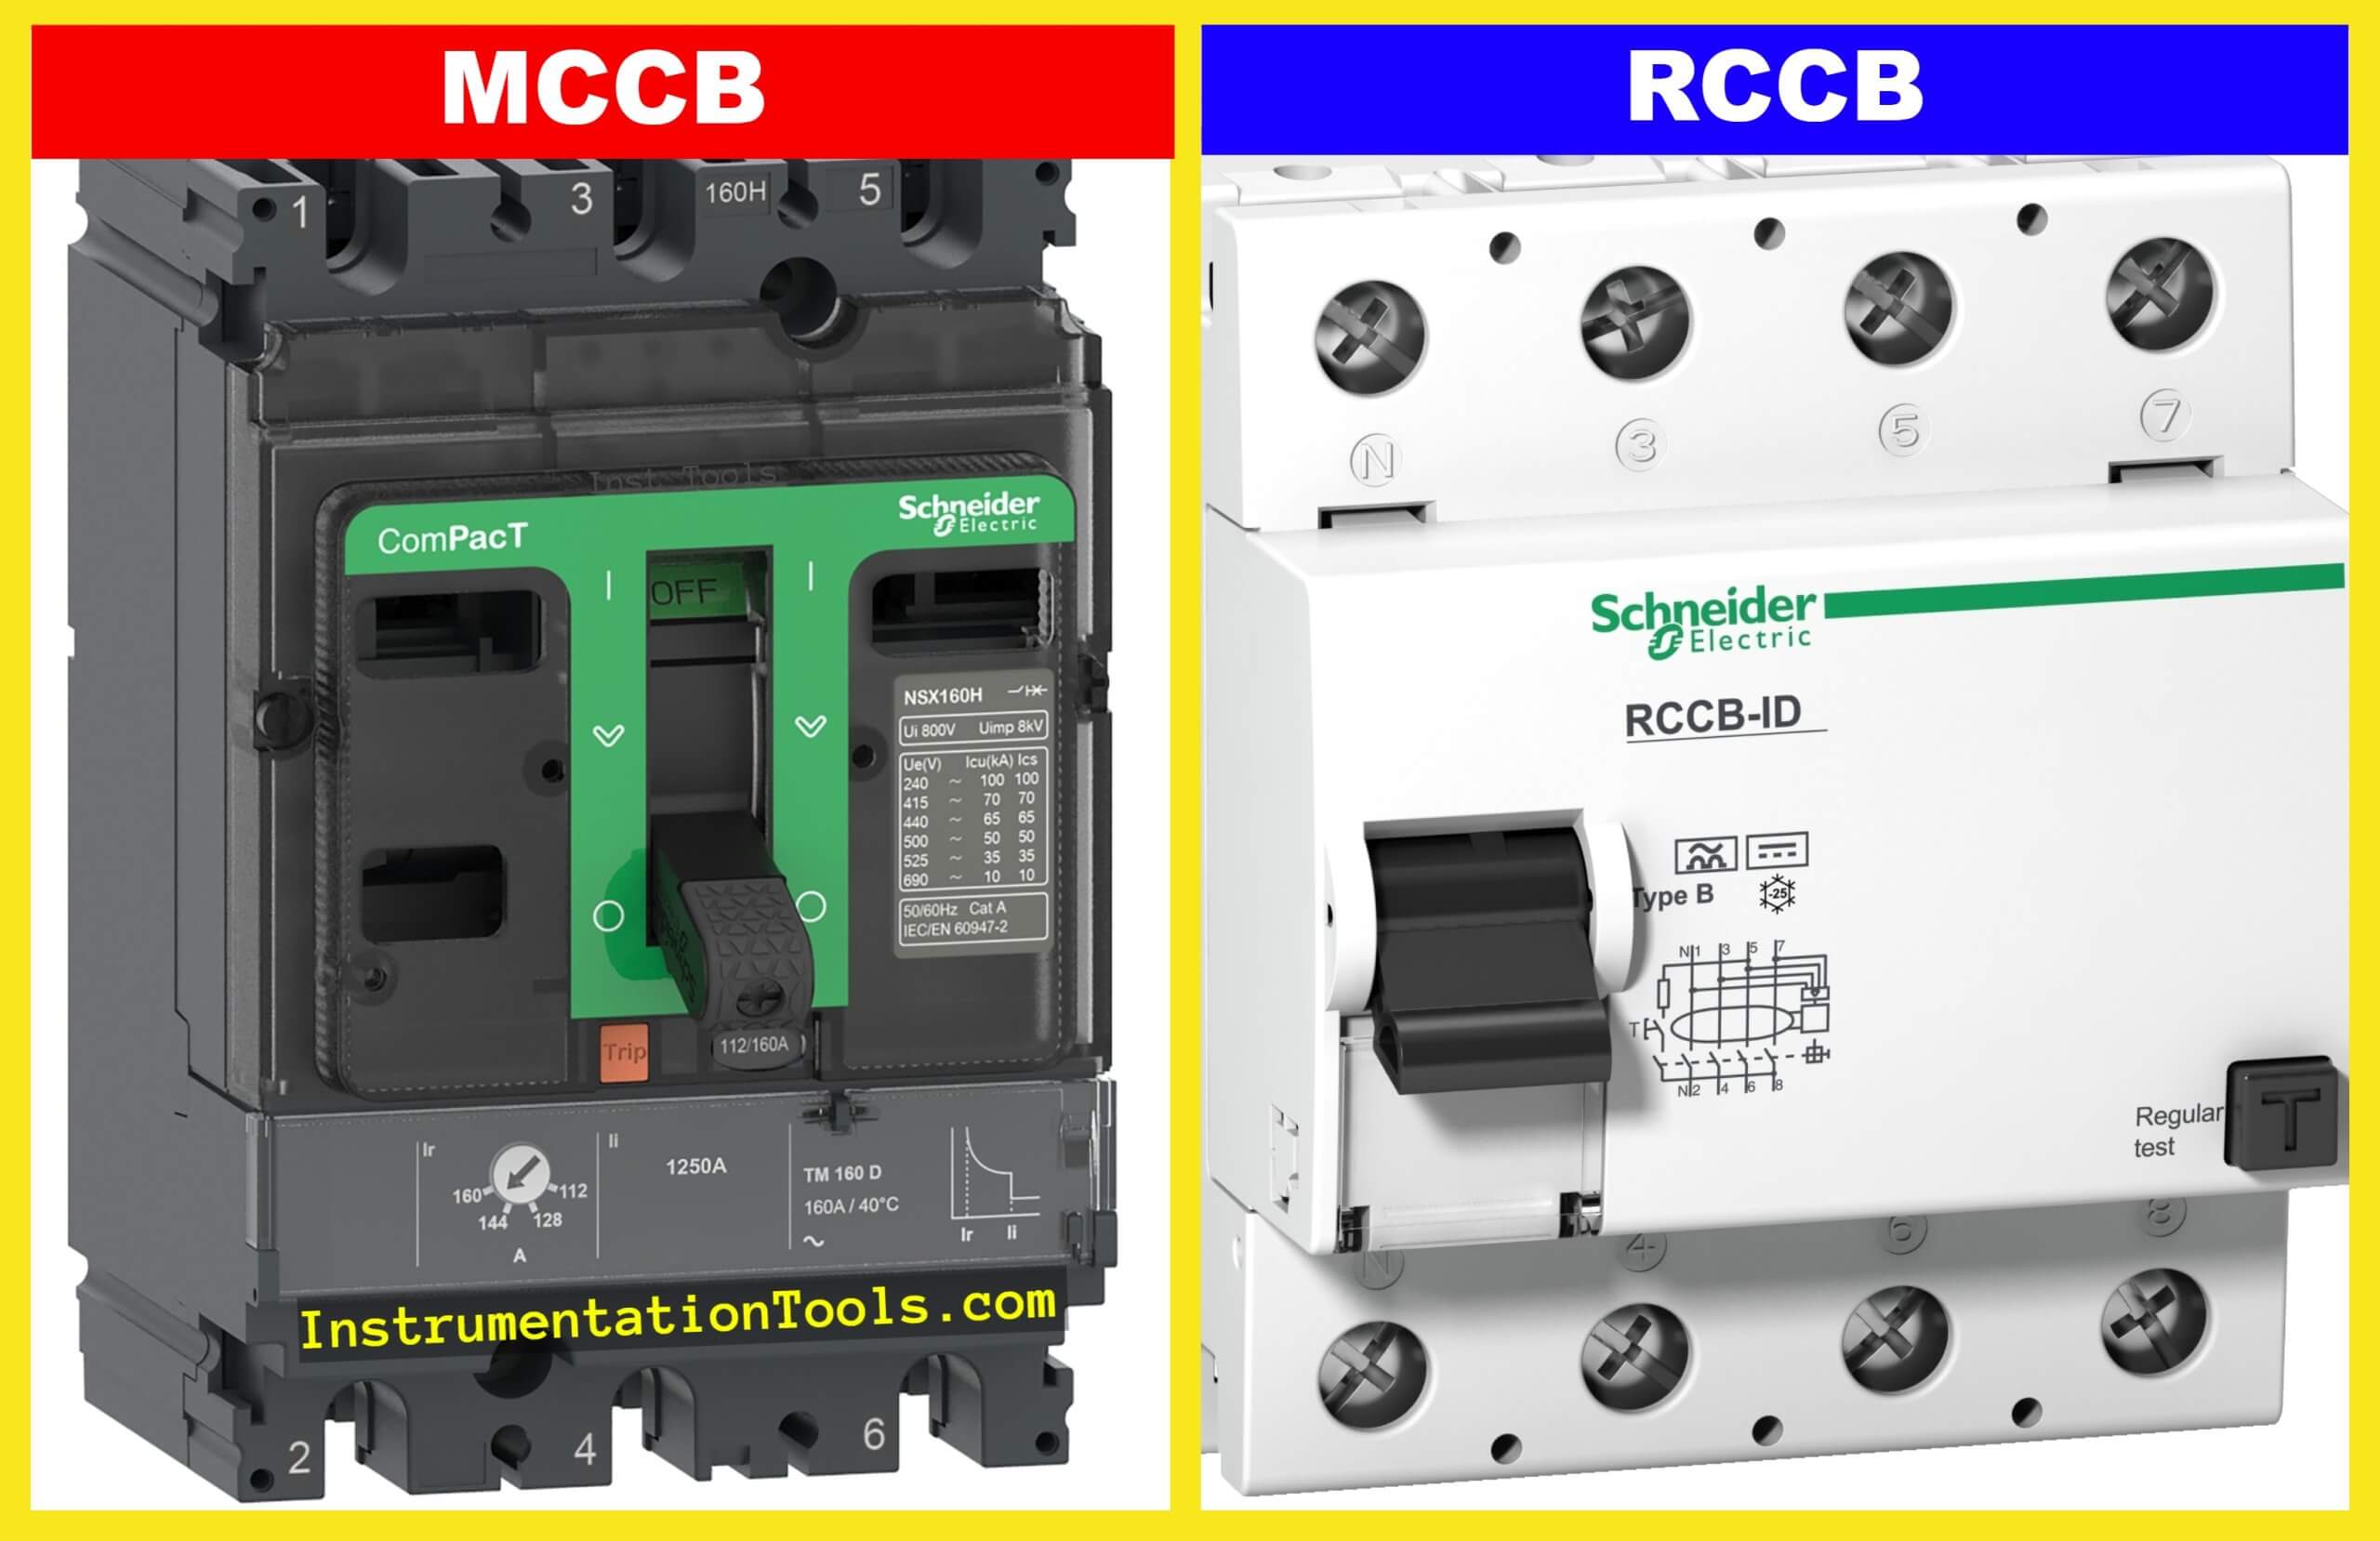 Difference Between RCCB and MCCB